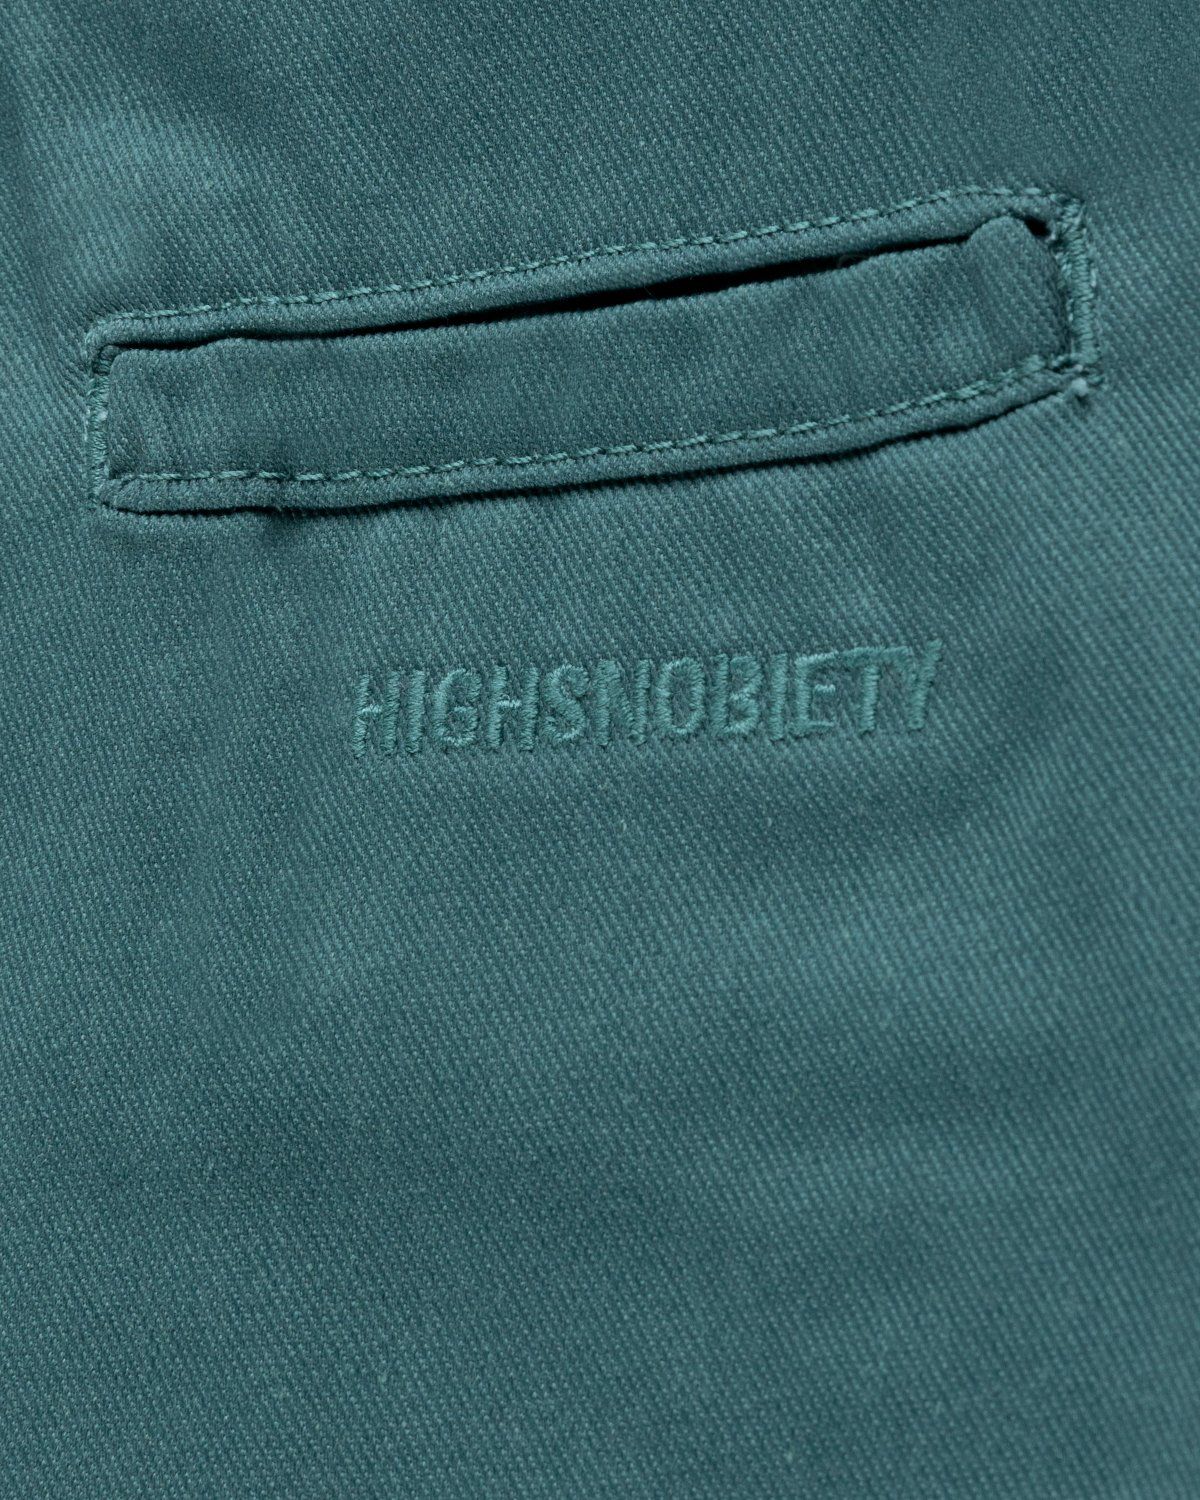 Highsnobiety x Dickies – Pleated Work Pants Lincoln Green - Pants - Green - Image 4